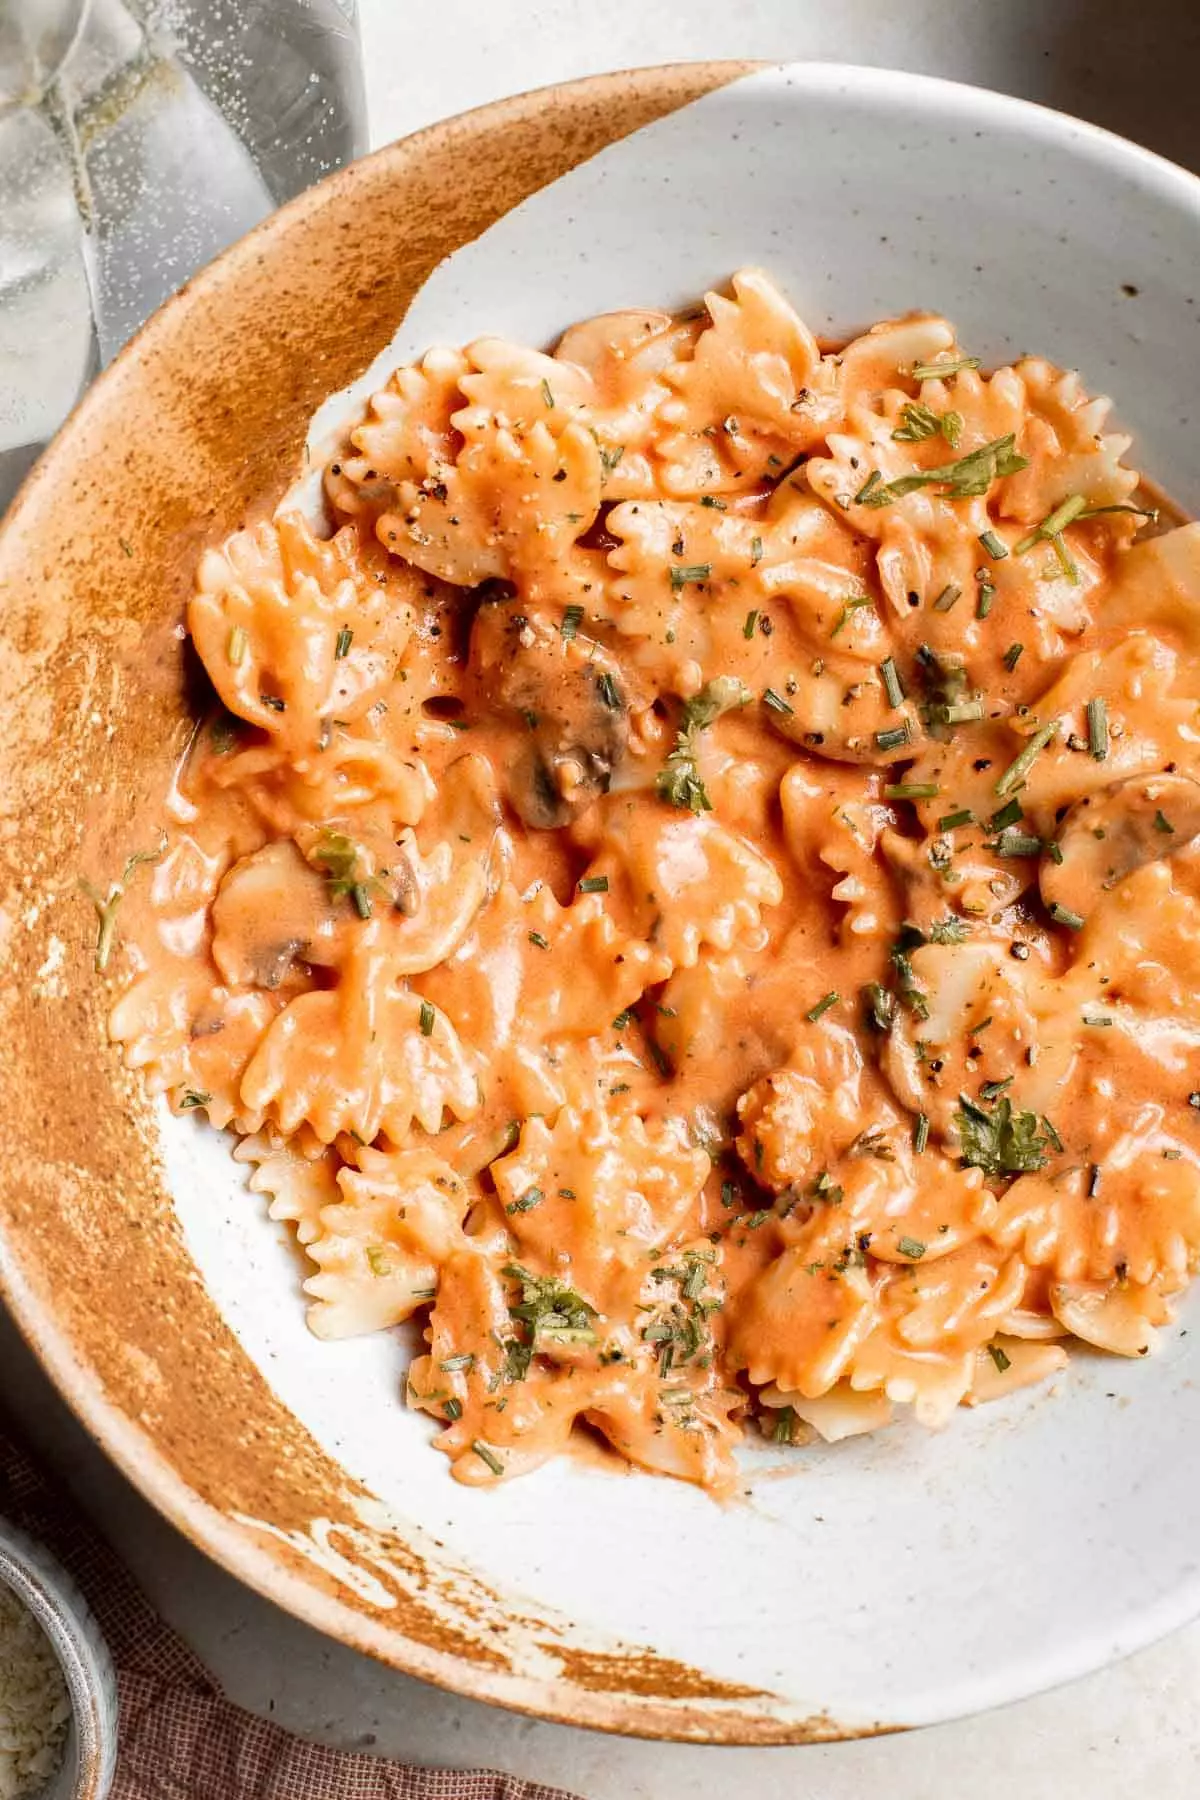 Farfalle pasta with mushroom rose sauce is creamy yet light, delicious and flavorful, and quick and easy to make in 20 minutes. Best comfort food dinner!